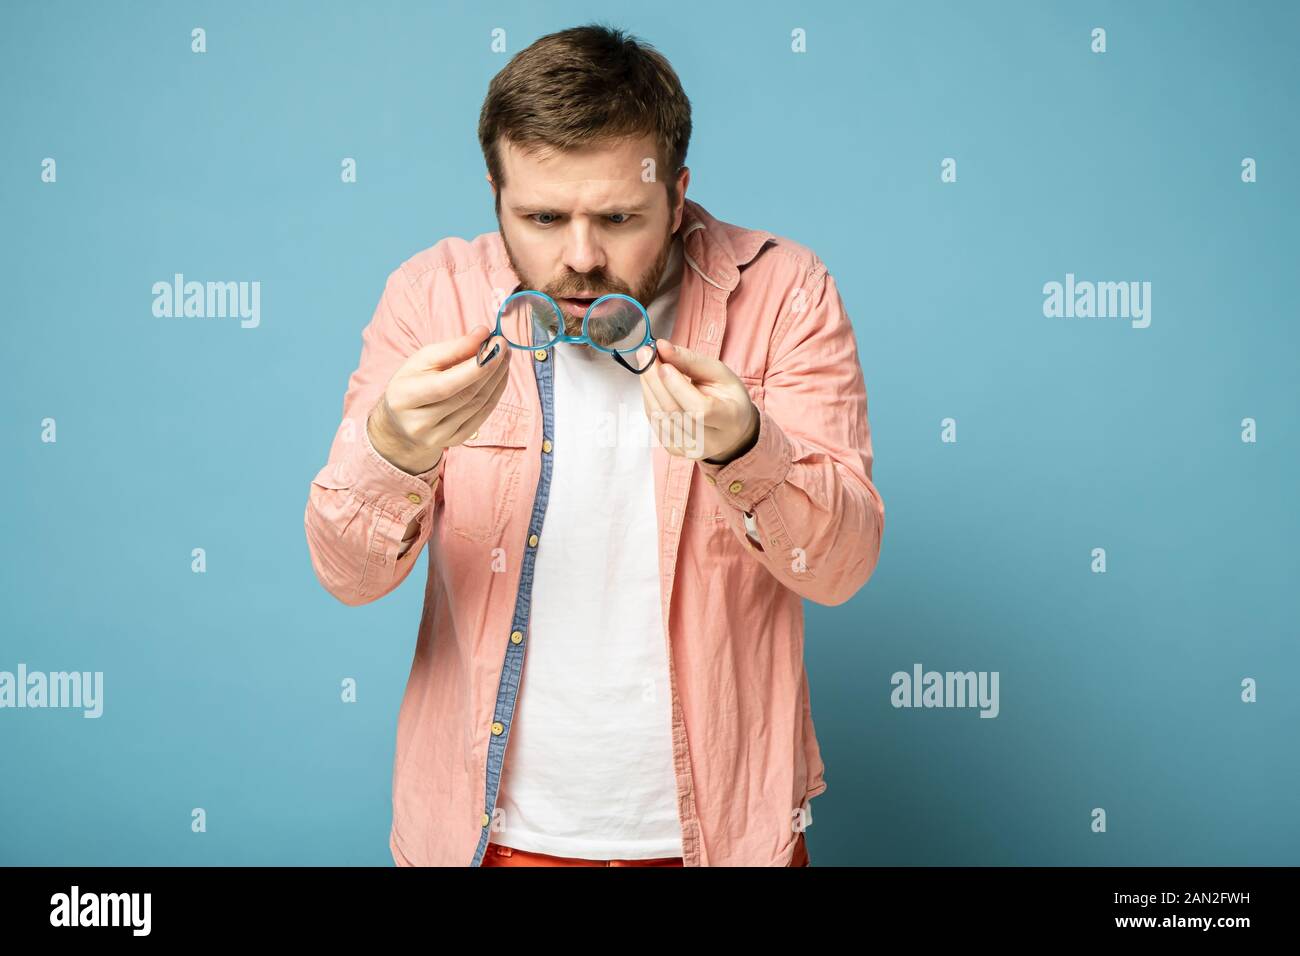 Shocked, strange bearded man holds glasses in hands and anxiously examines a lens. Stock Photo